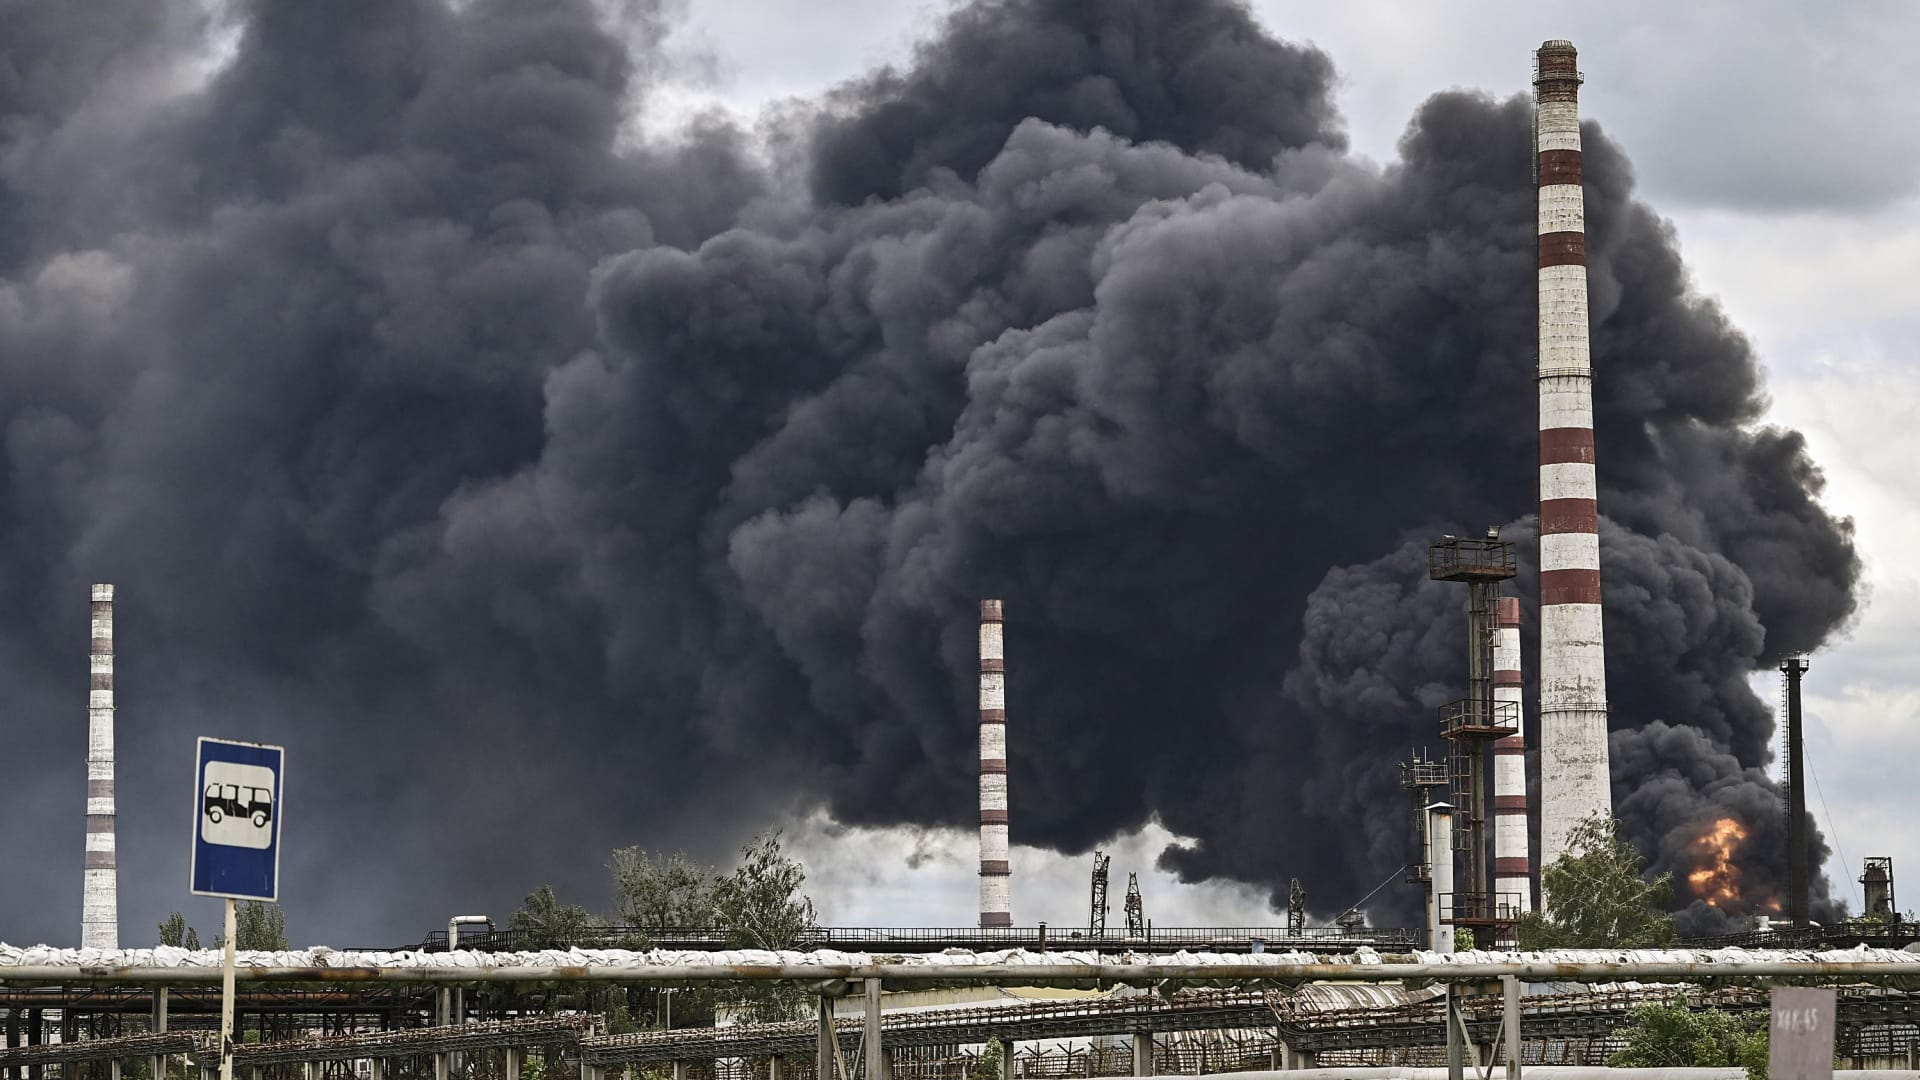 Smoke rises from an oil refinery after an attack outside the city of Lysychansk in the eastern Ukranian region of Donbas, on May 22, 2022, on the 88th day of the Russian invasion of Ukraine.